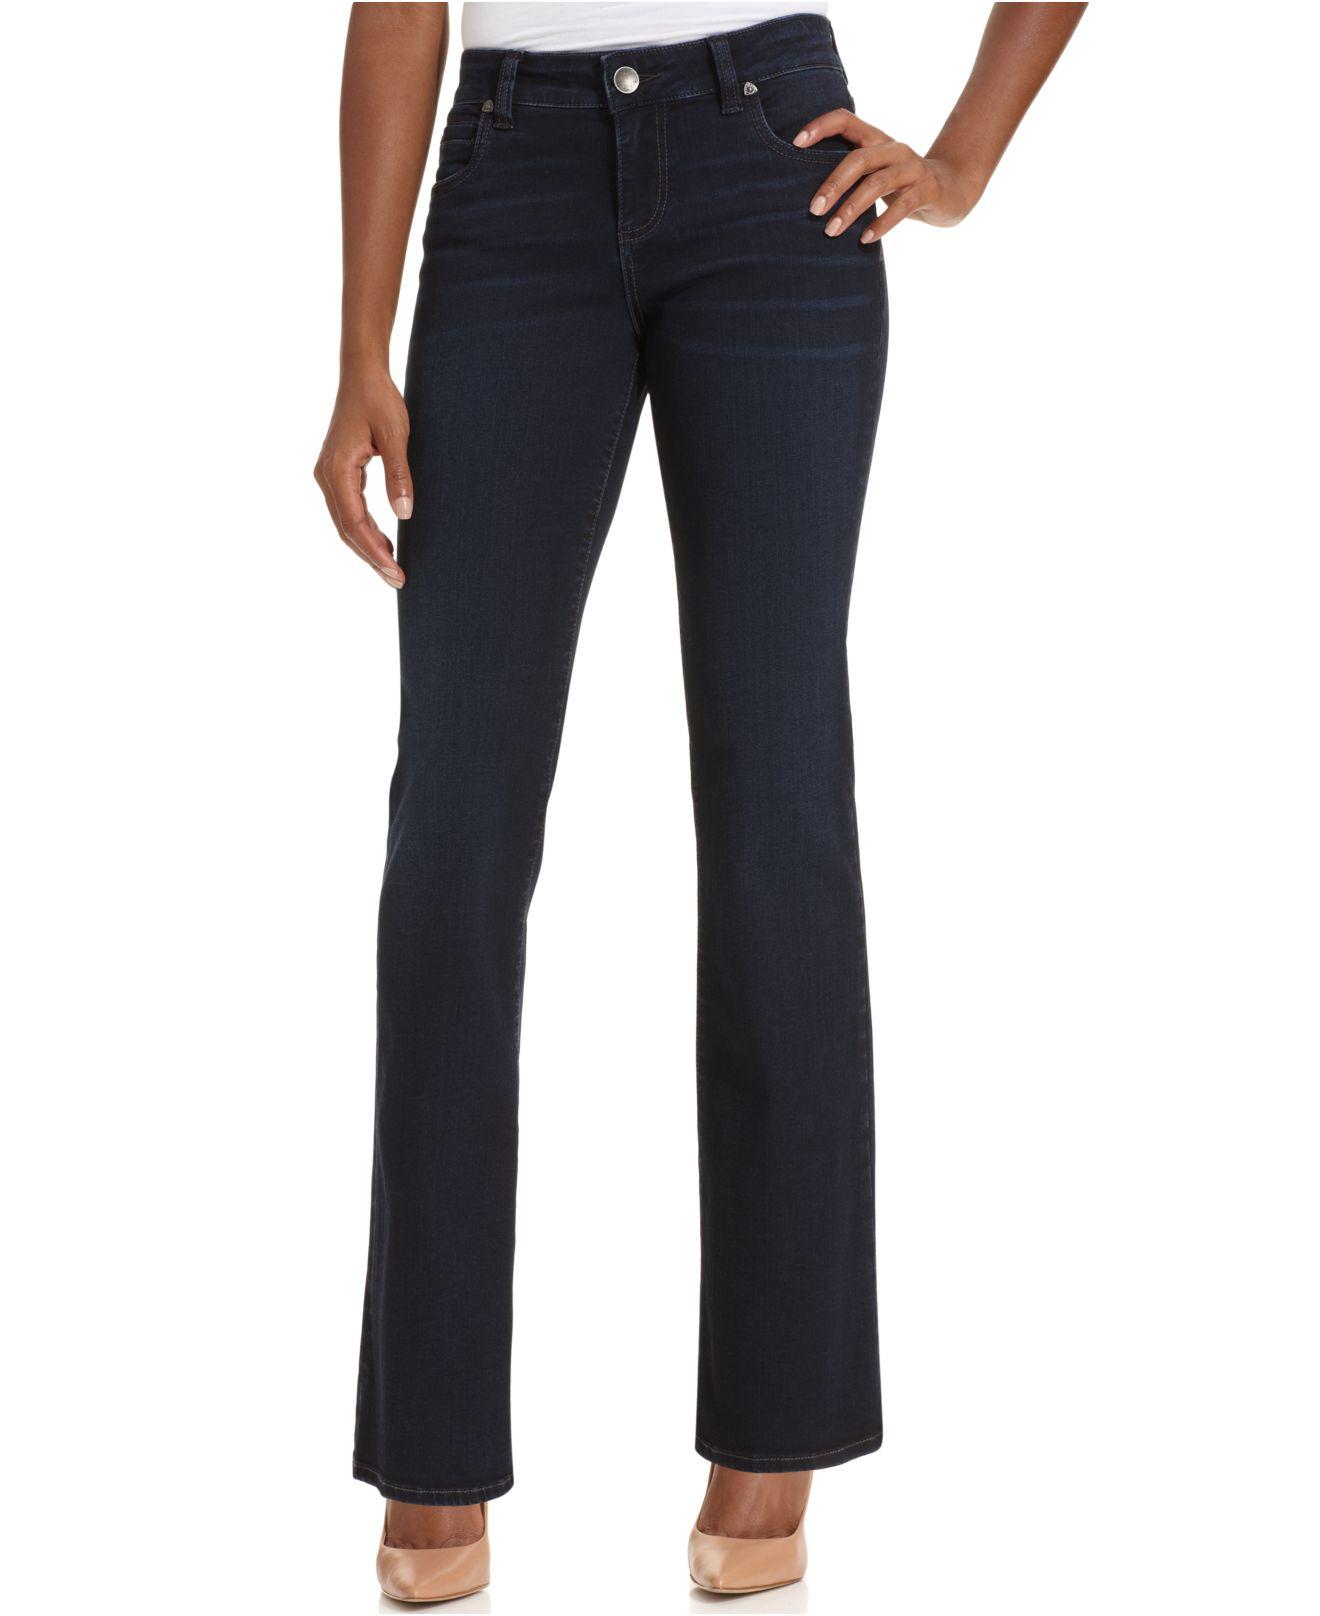 Kut From The Kloth Denim Natalie Bootcut Jeans in Blue - Lyst